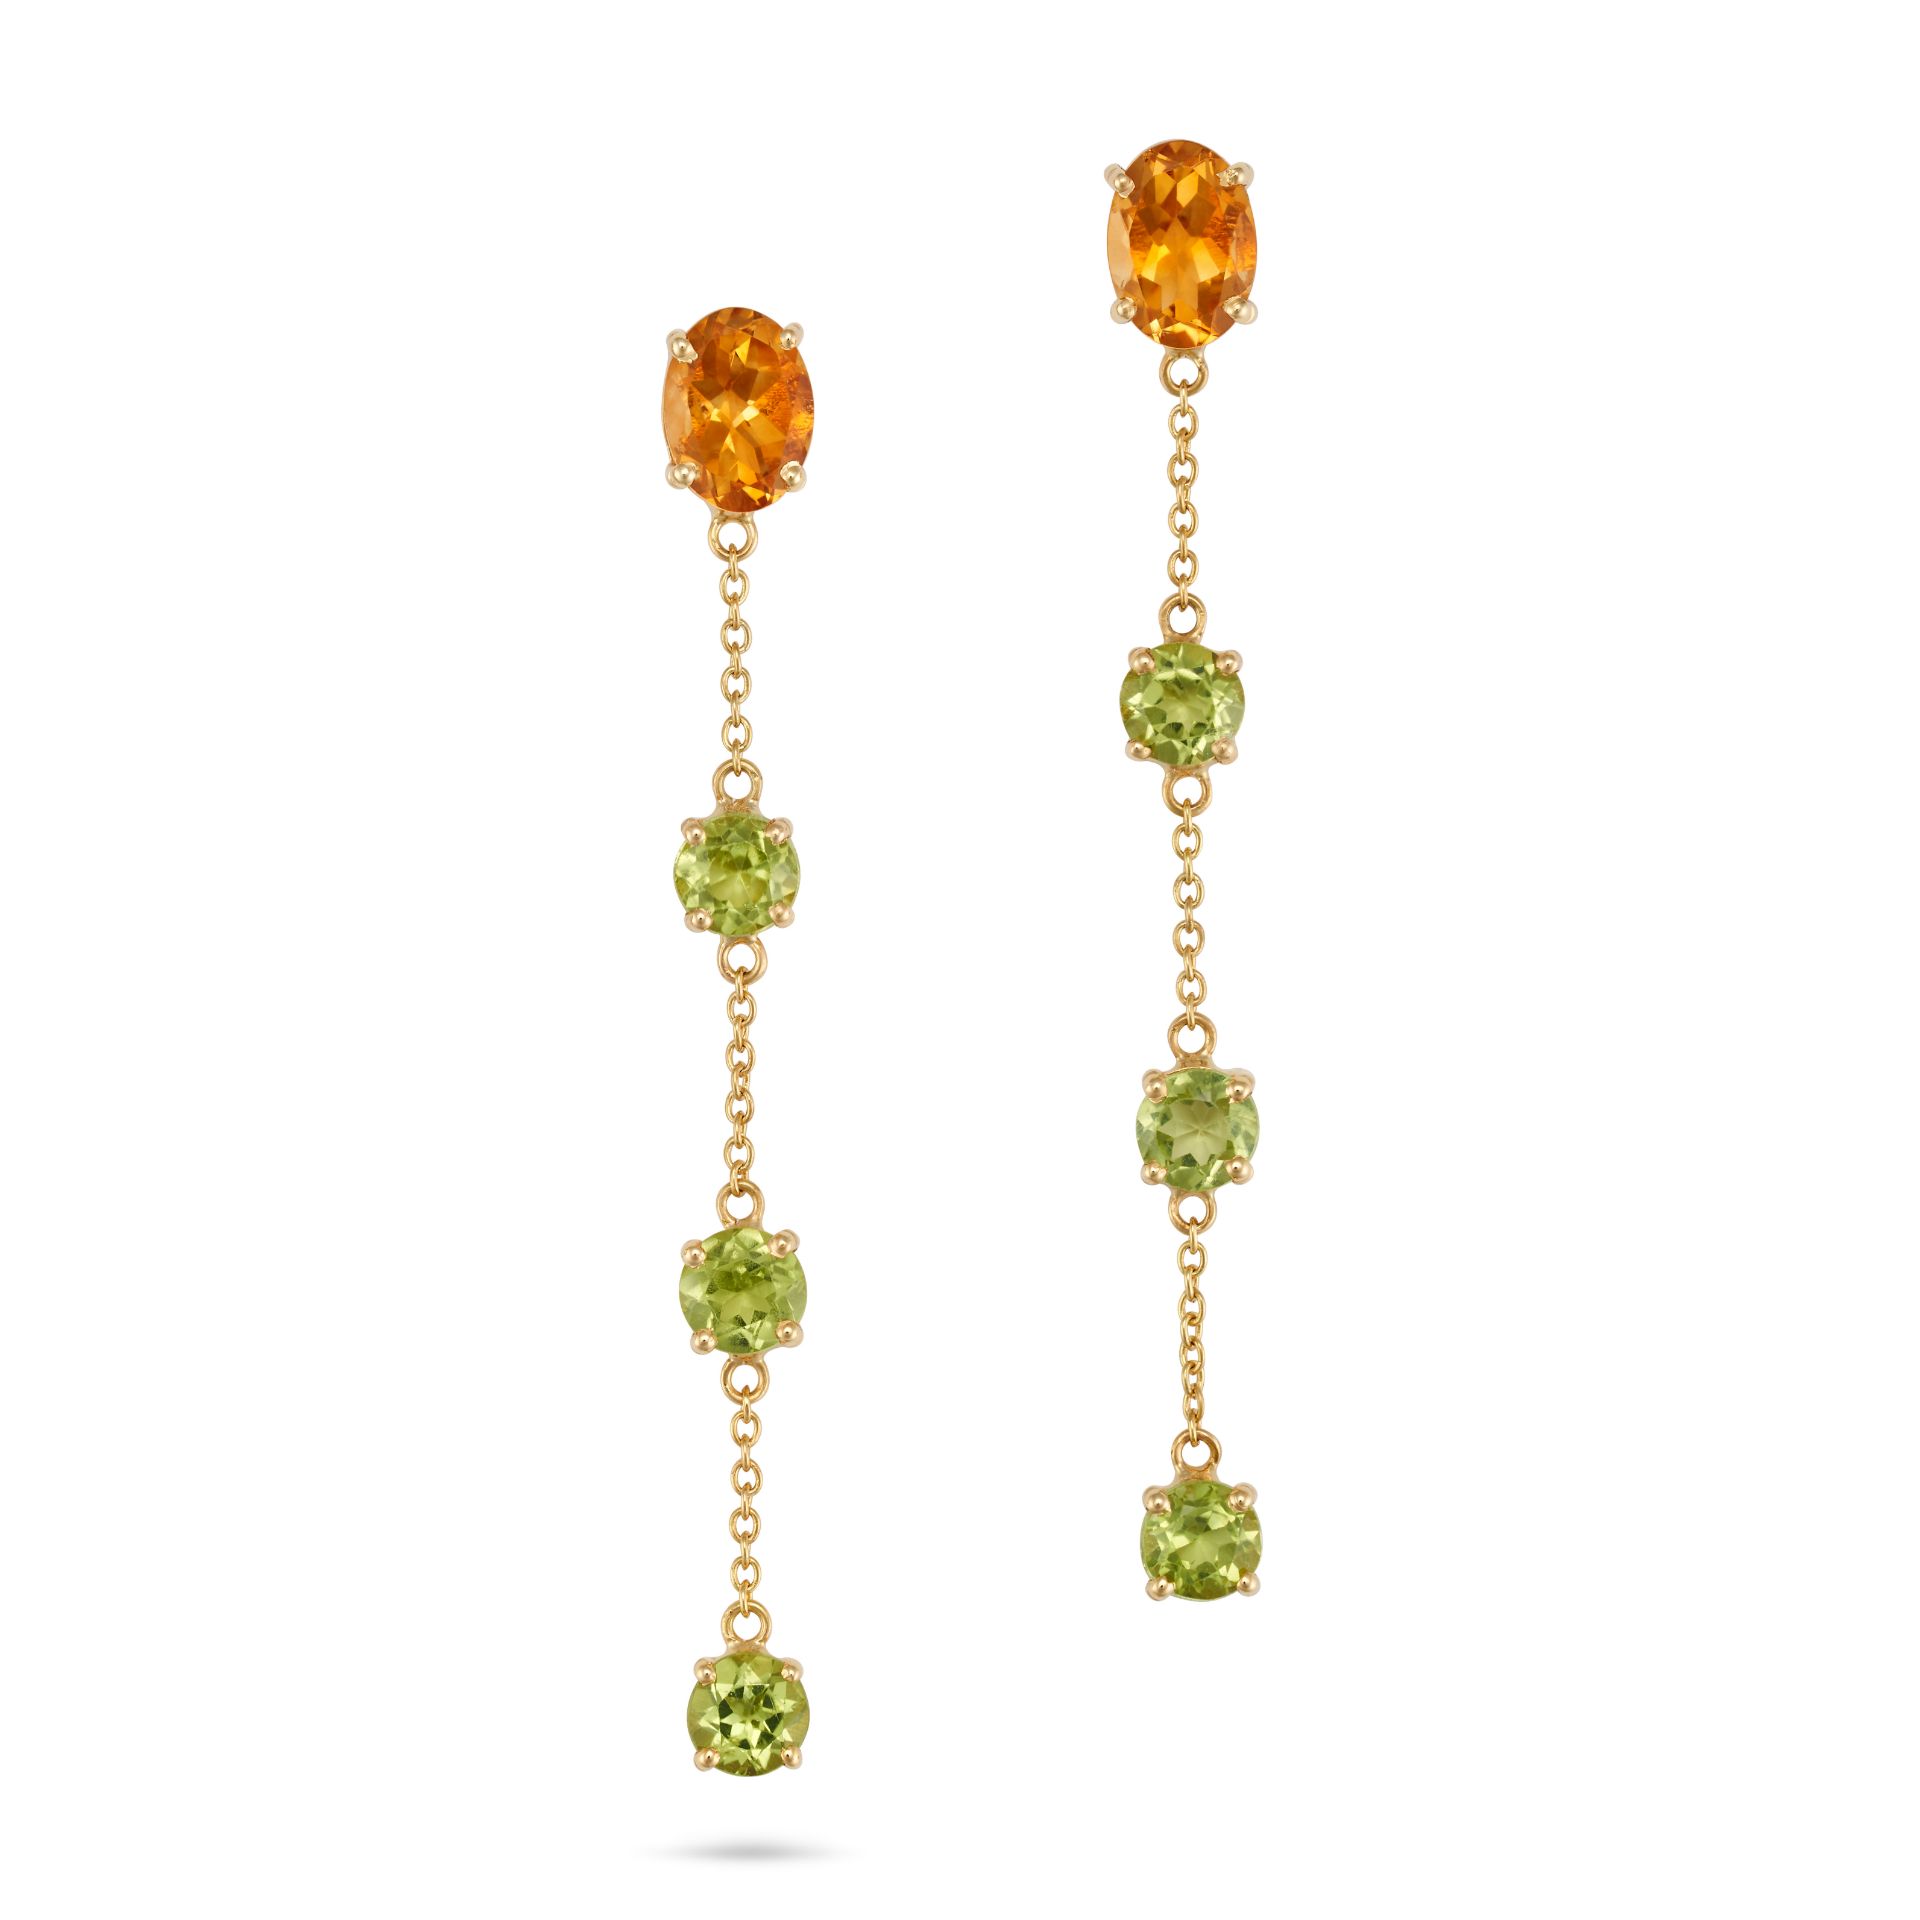 A PAIR OF CITRINE AND PERIDOT DROP EARRINGS each set with an oval cut citrine suspending three ro...